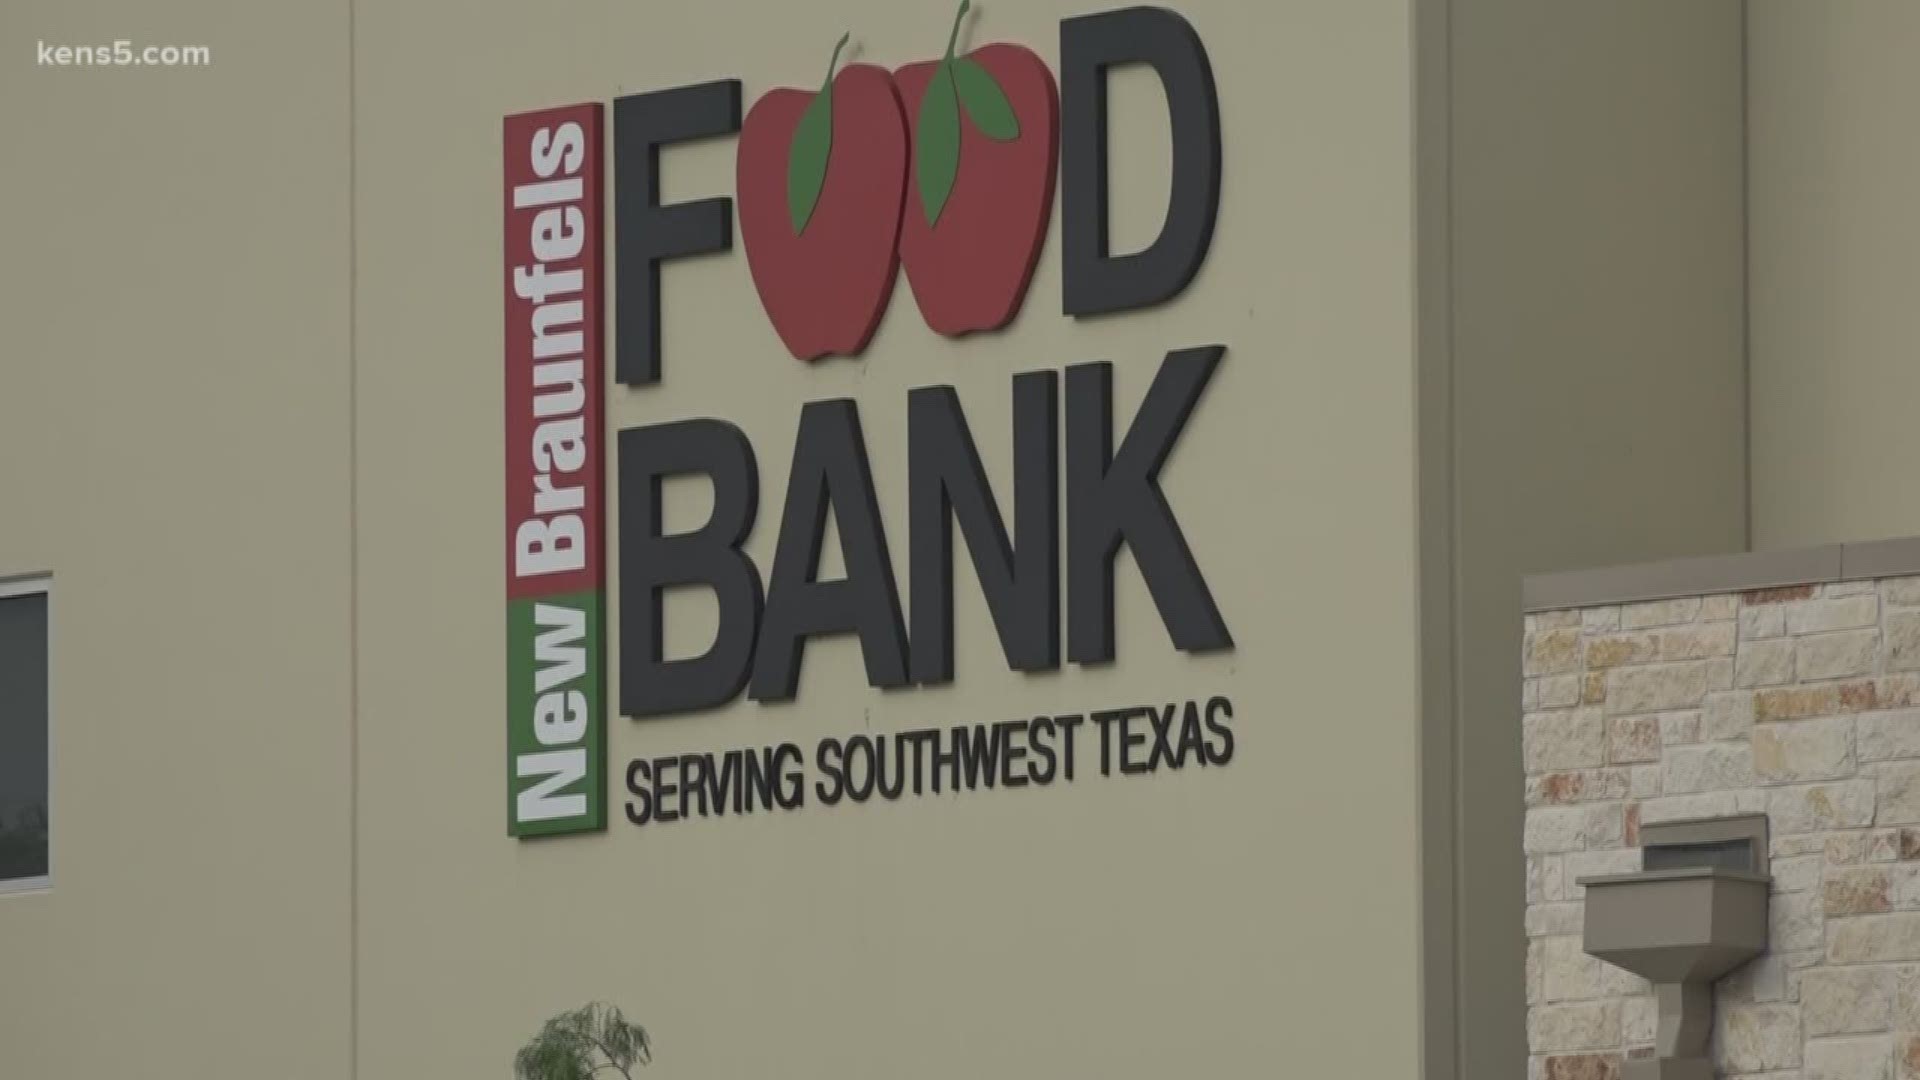 With even more neighbors in need these days, volunteers at the New Braunfels Food Bank are stepping up; filling trunks with food and the community with hope.